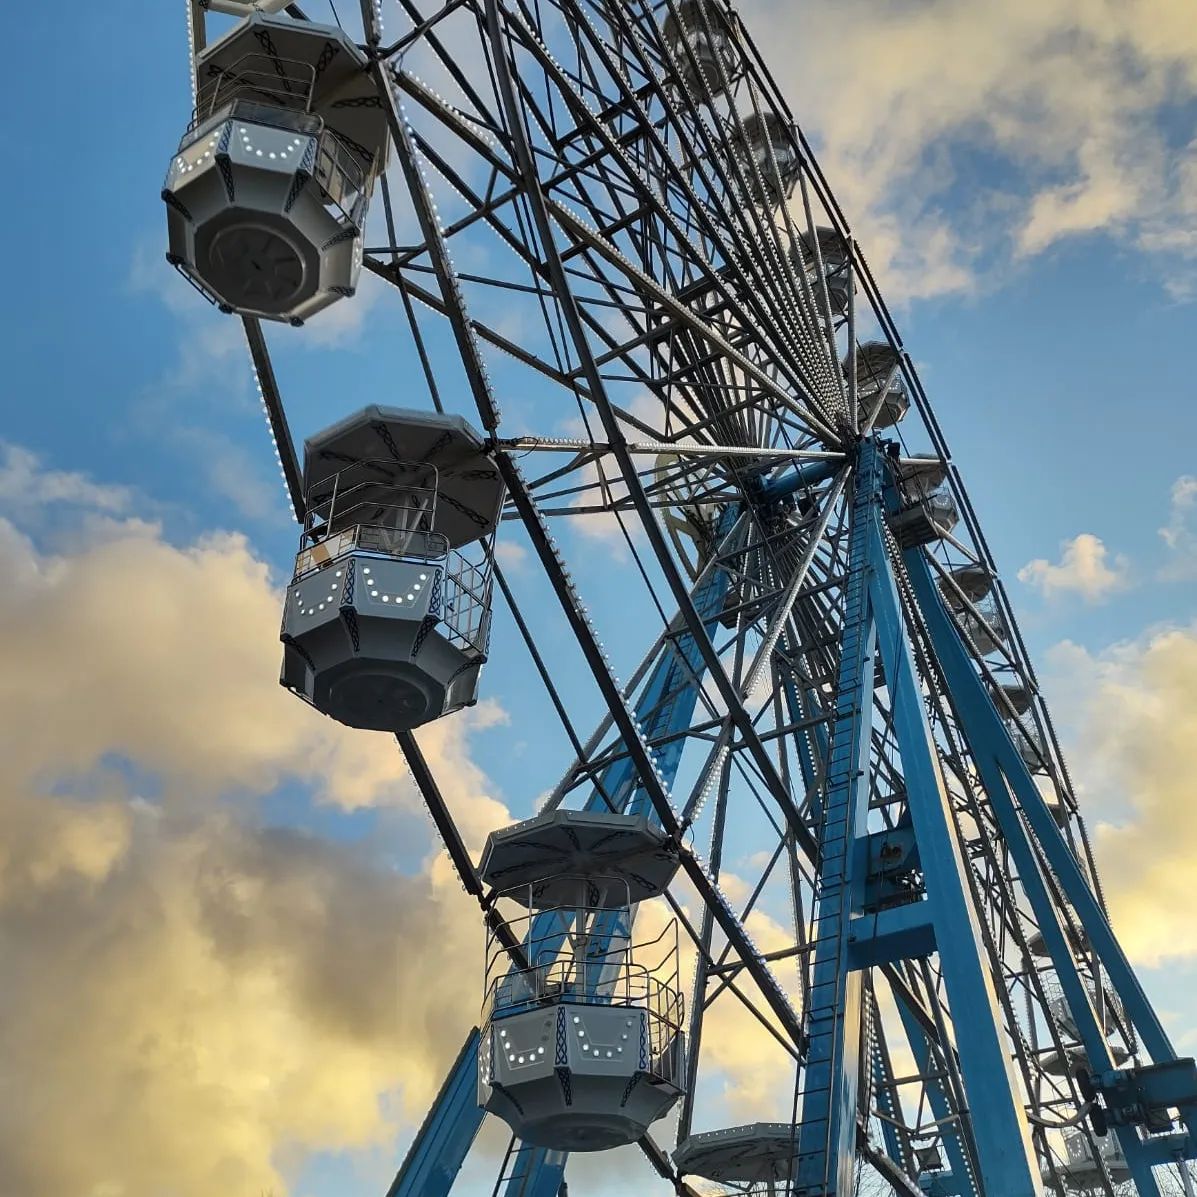 Limerick’s Panoramic Wheel has moved to the Potato Market for @riverfestlimerick! 🎡 Soar high and see the sights from the sky across the mighty River Shannon and beyond! 🏙️ 📸 @aniestefani (Instagram) #RiverfestLimerick #LimerickEdgeEmbrace #ThingsToDoInLimerick